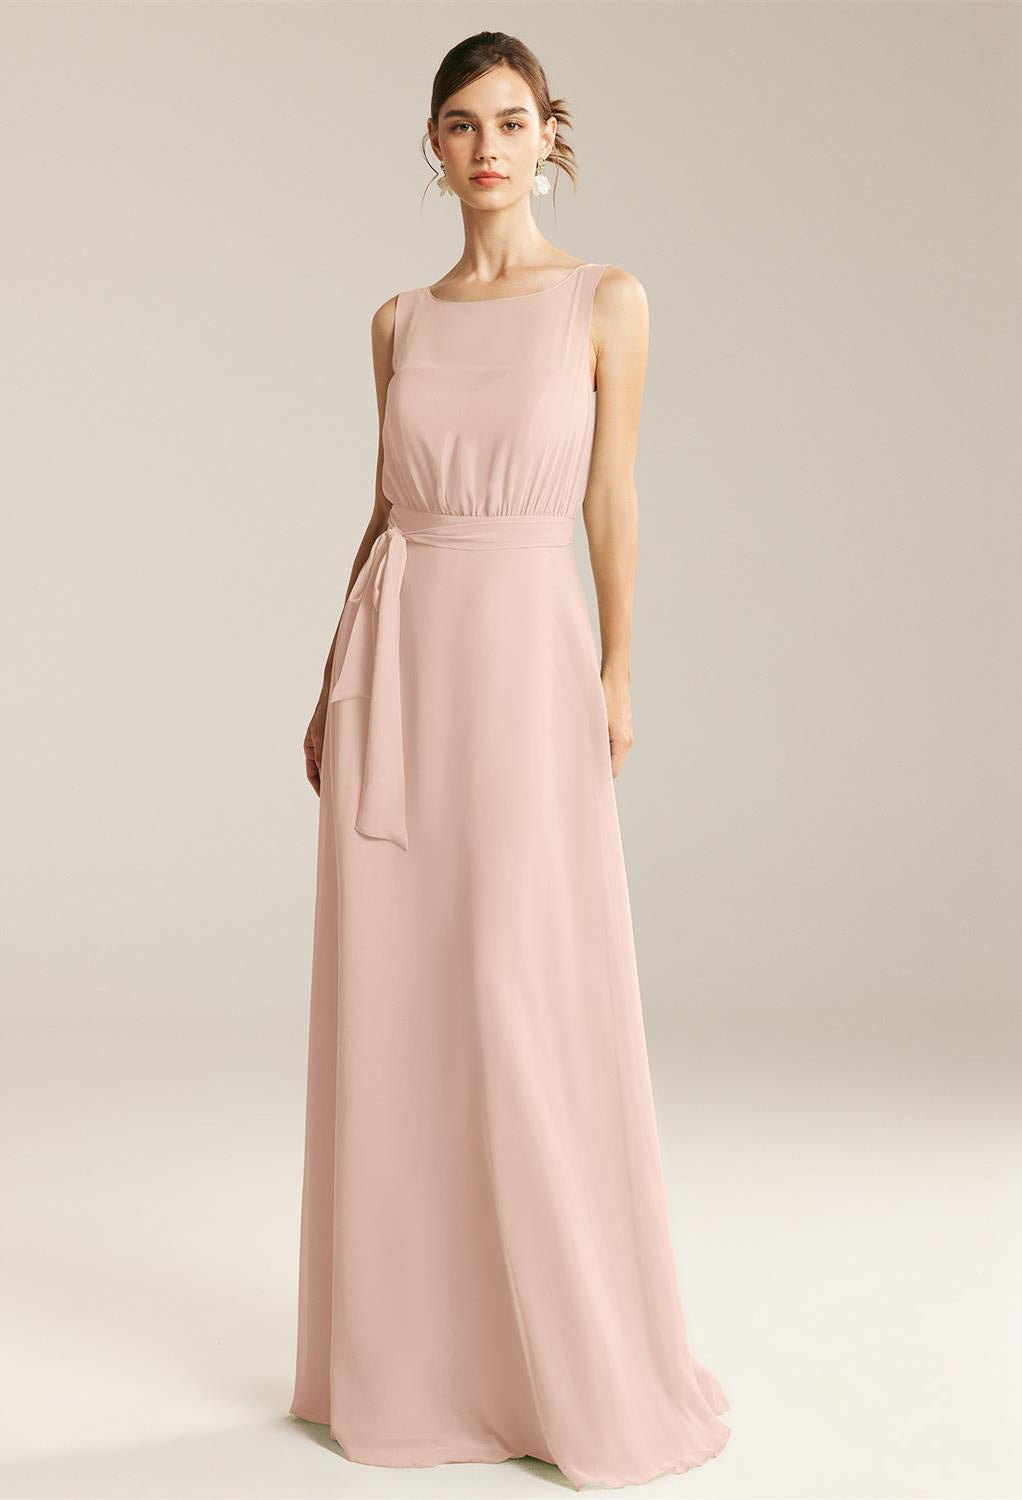 Evita - Chiffon Bridesmaid Dress - Off The Rack from Bergamot Bridal is now available at our bridal shop in London.